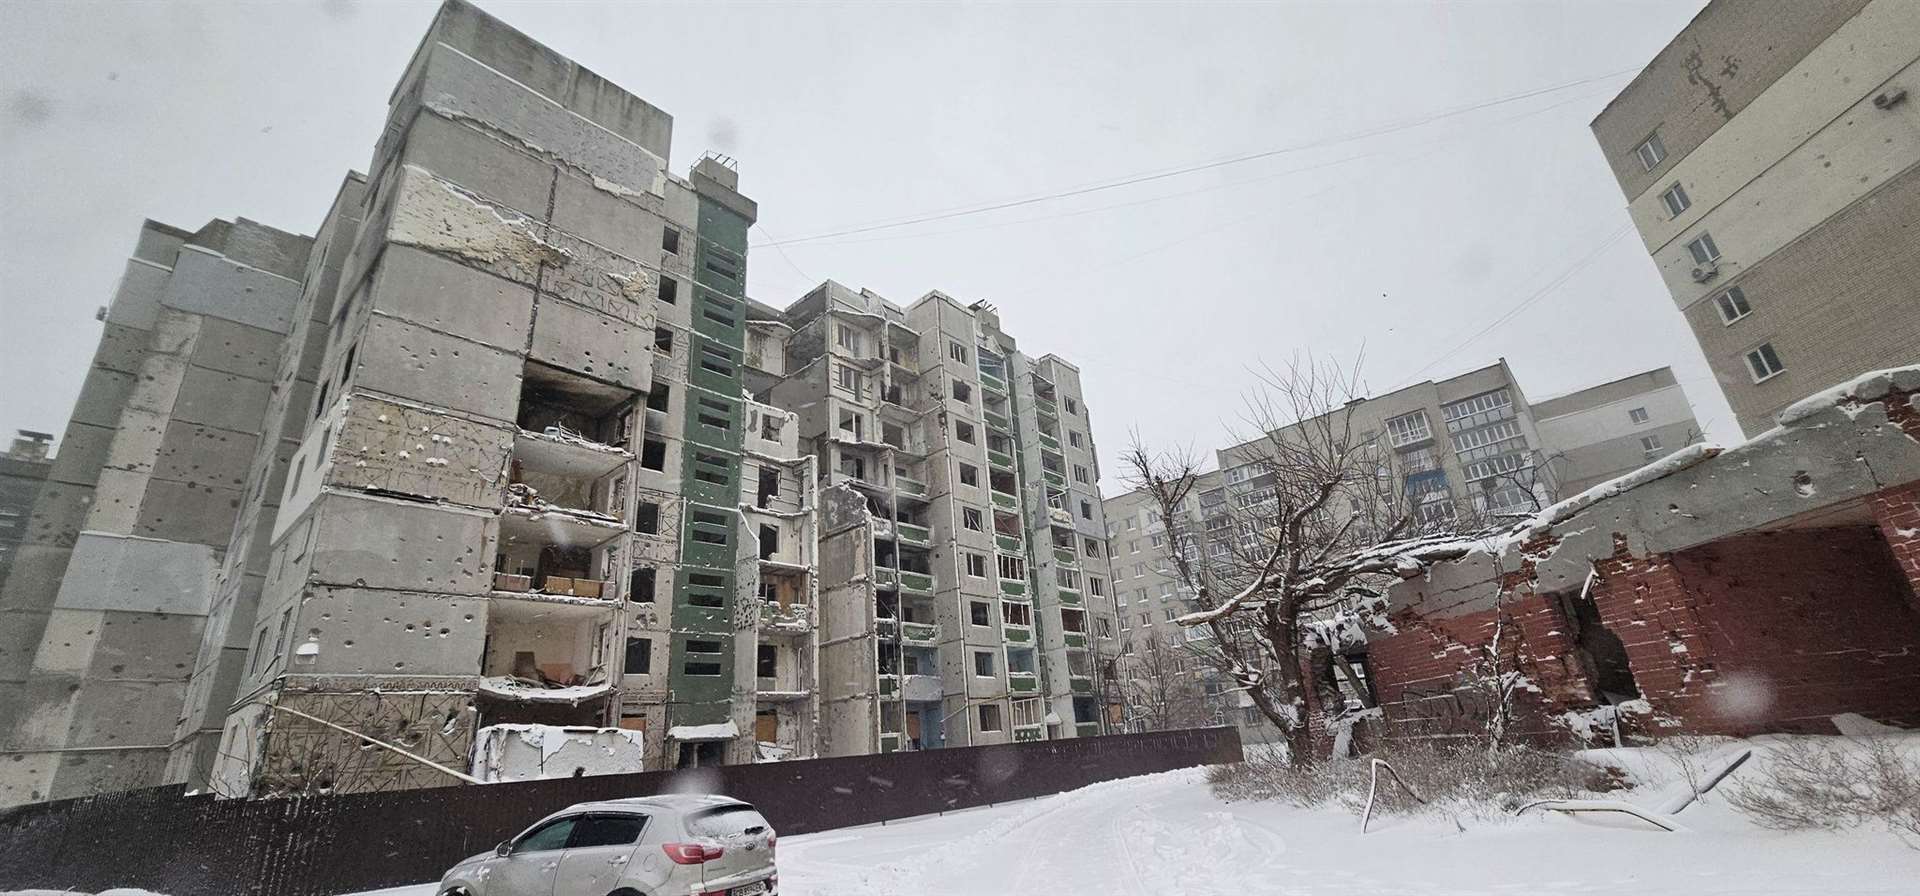 Bomb damage in Kyiv. Picture supplied by Cllr Jordan Meade